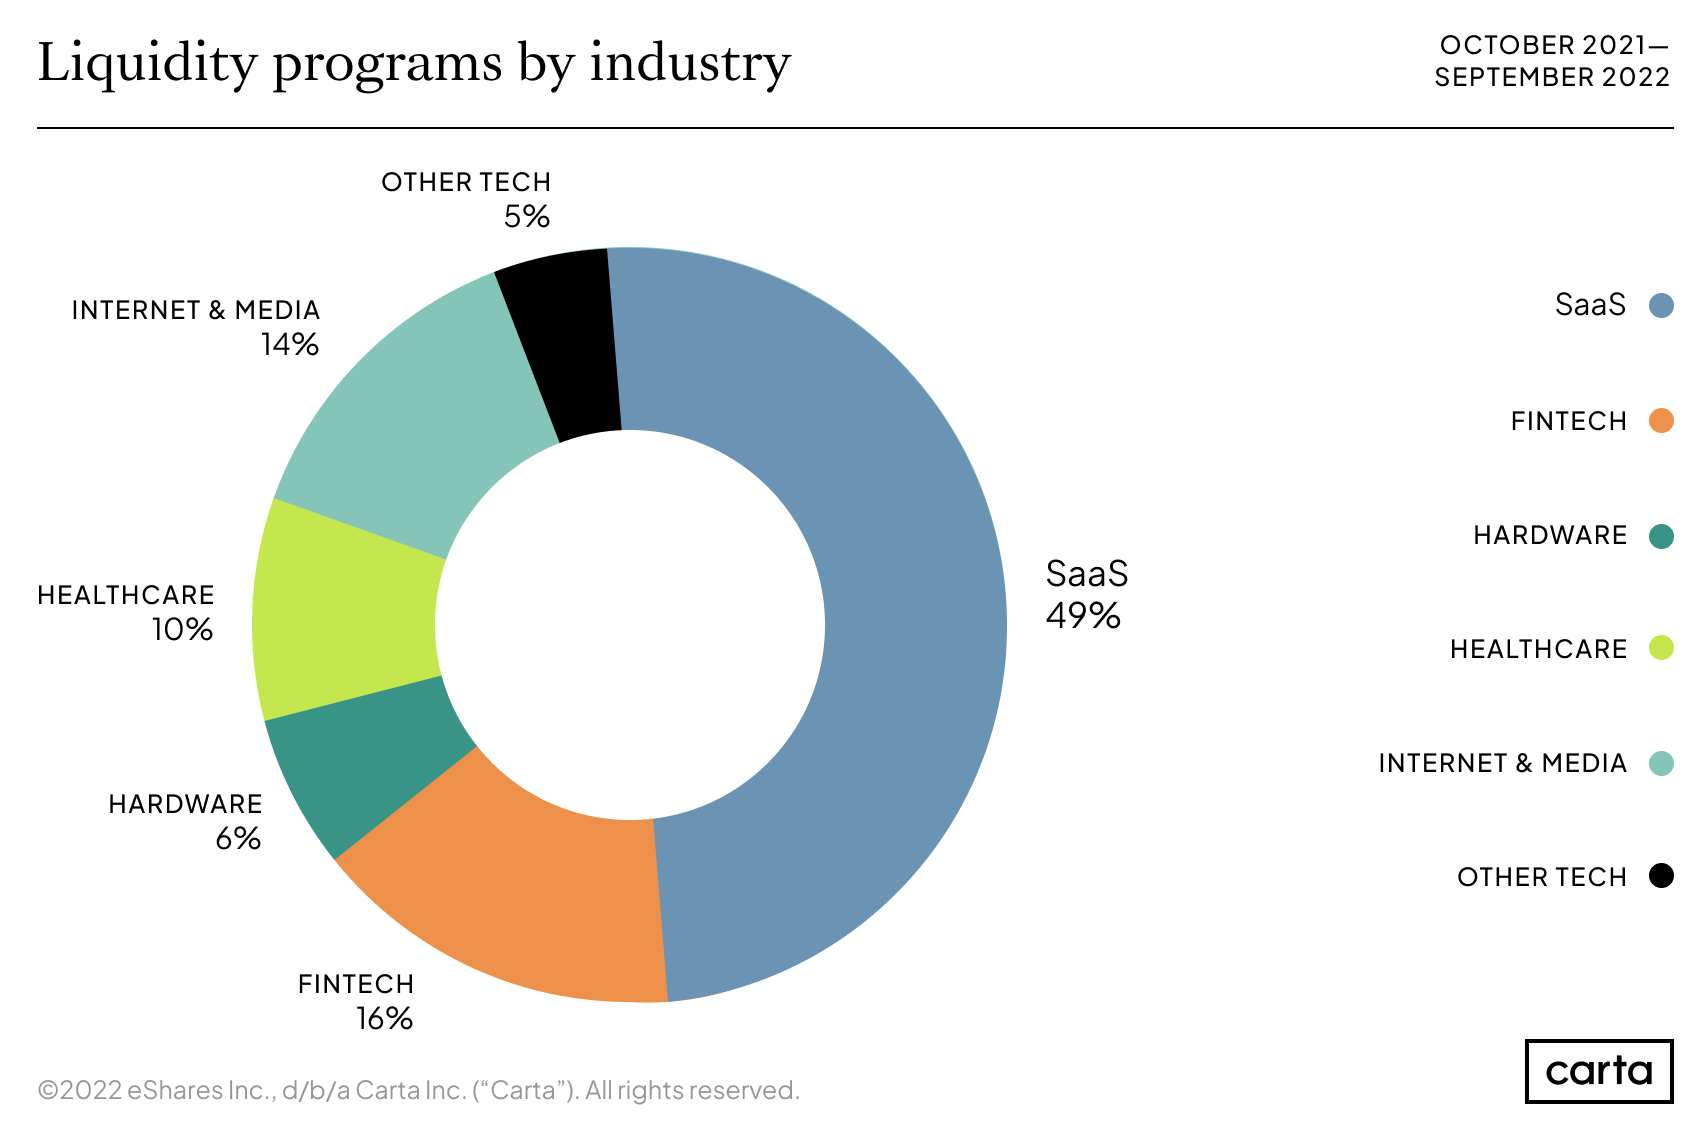 Liquidity programs by industry, October 2021–September 2022